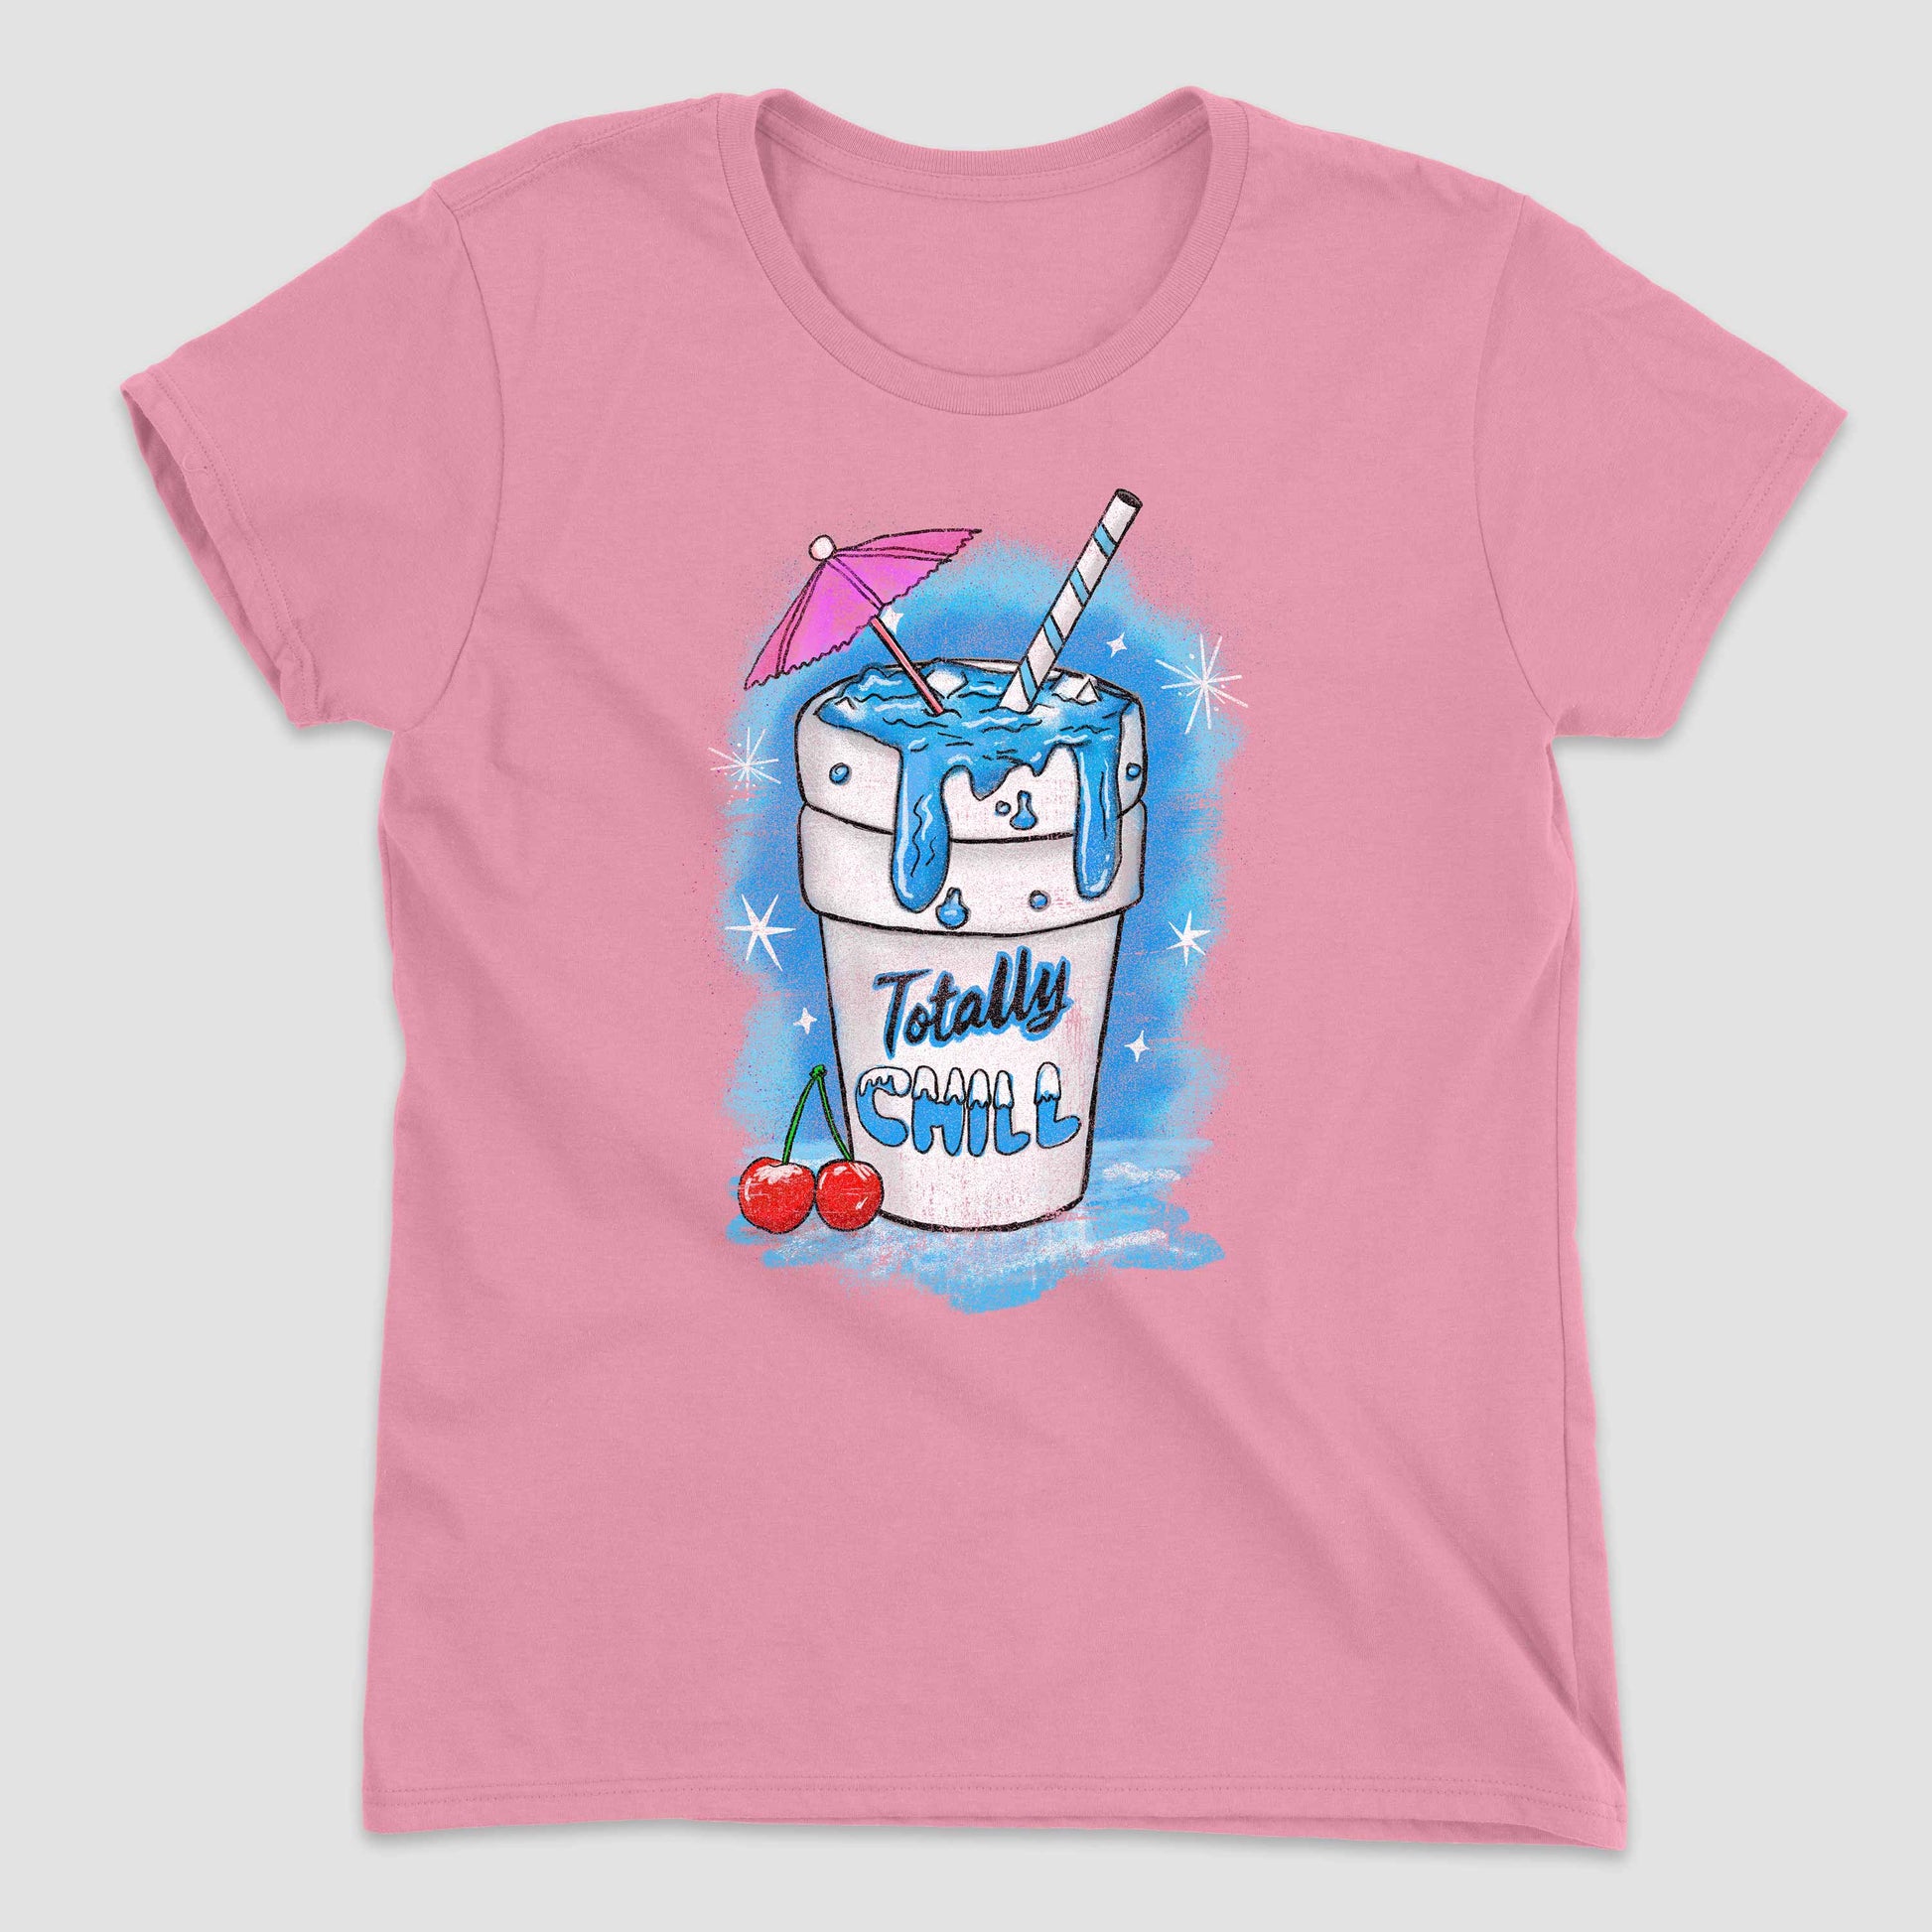 Charity Pink Totally Chill Women's Graphic T-Shirt by Snaxtime